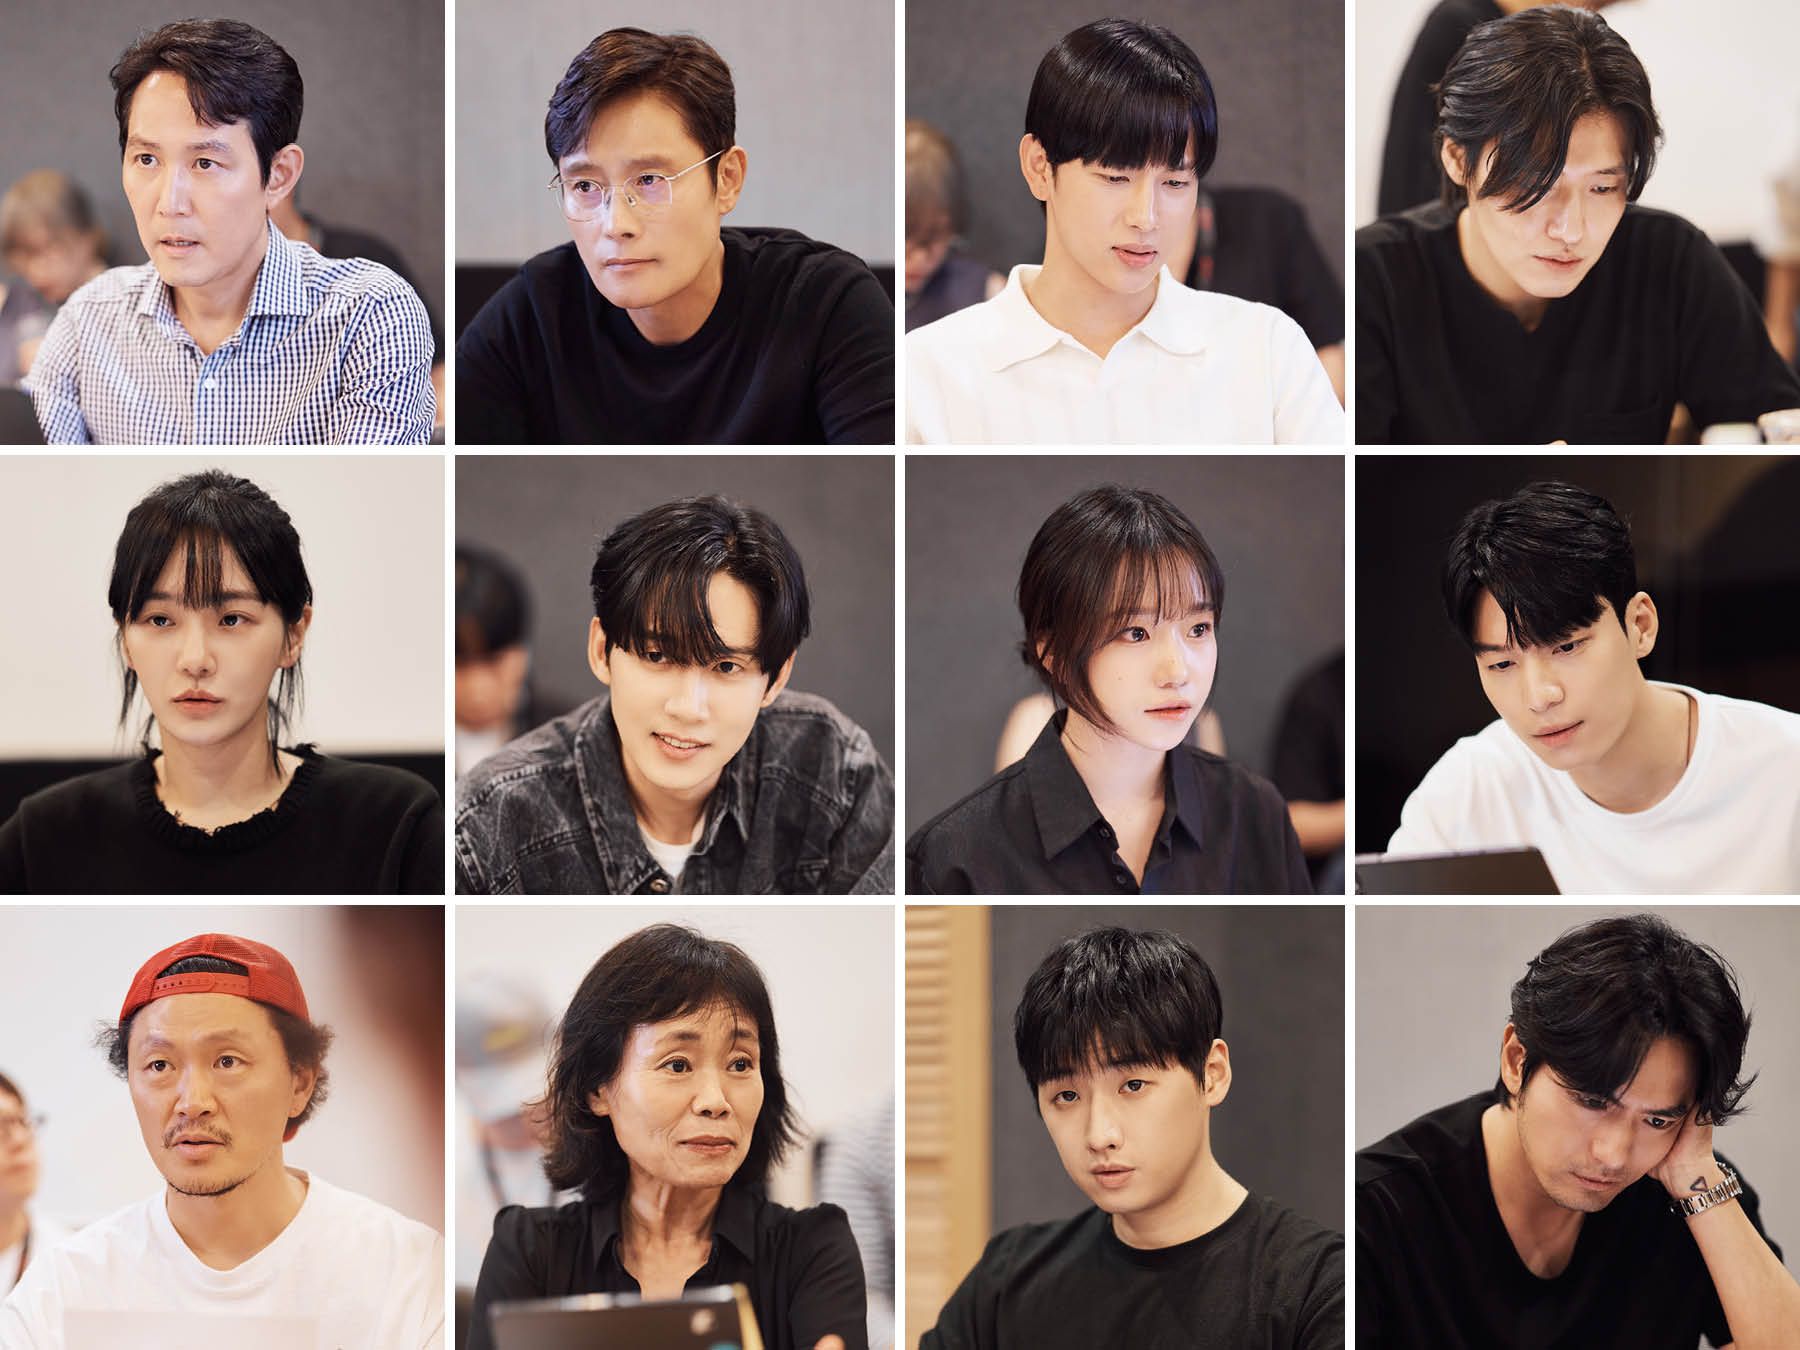 Squid Game” fans riled by all-male cast reveal for Season 2 : Arts &  Entertainment : News : The Hankyoreh